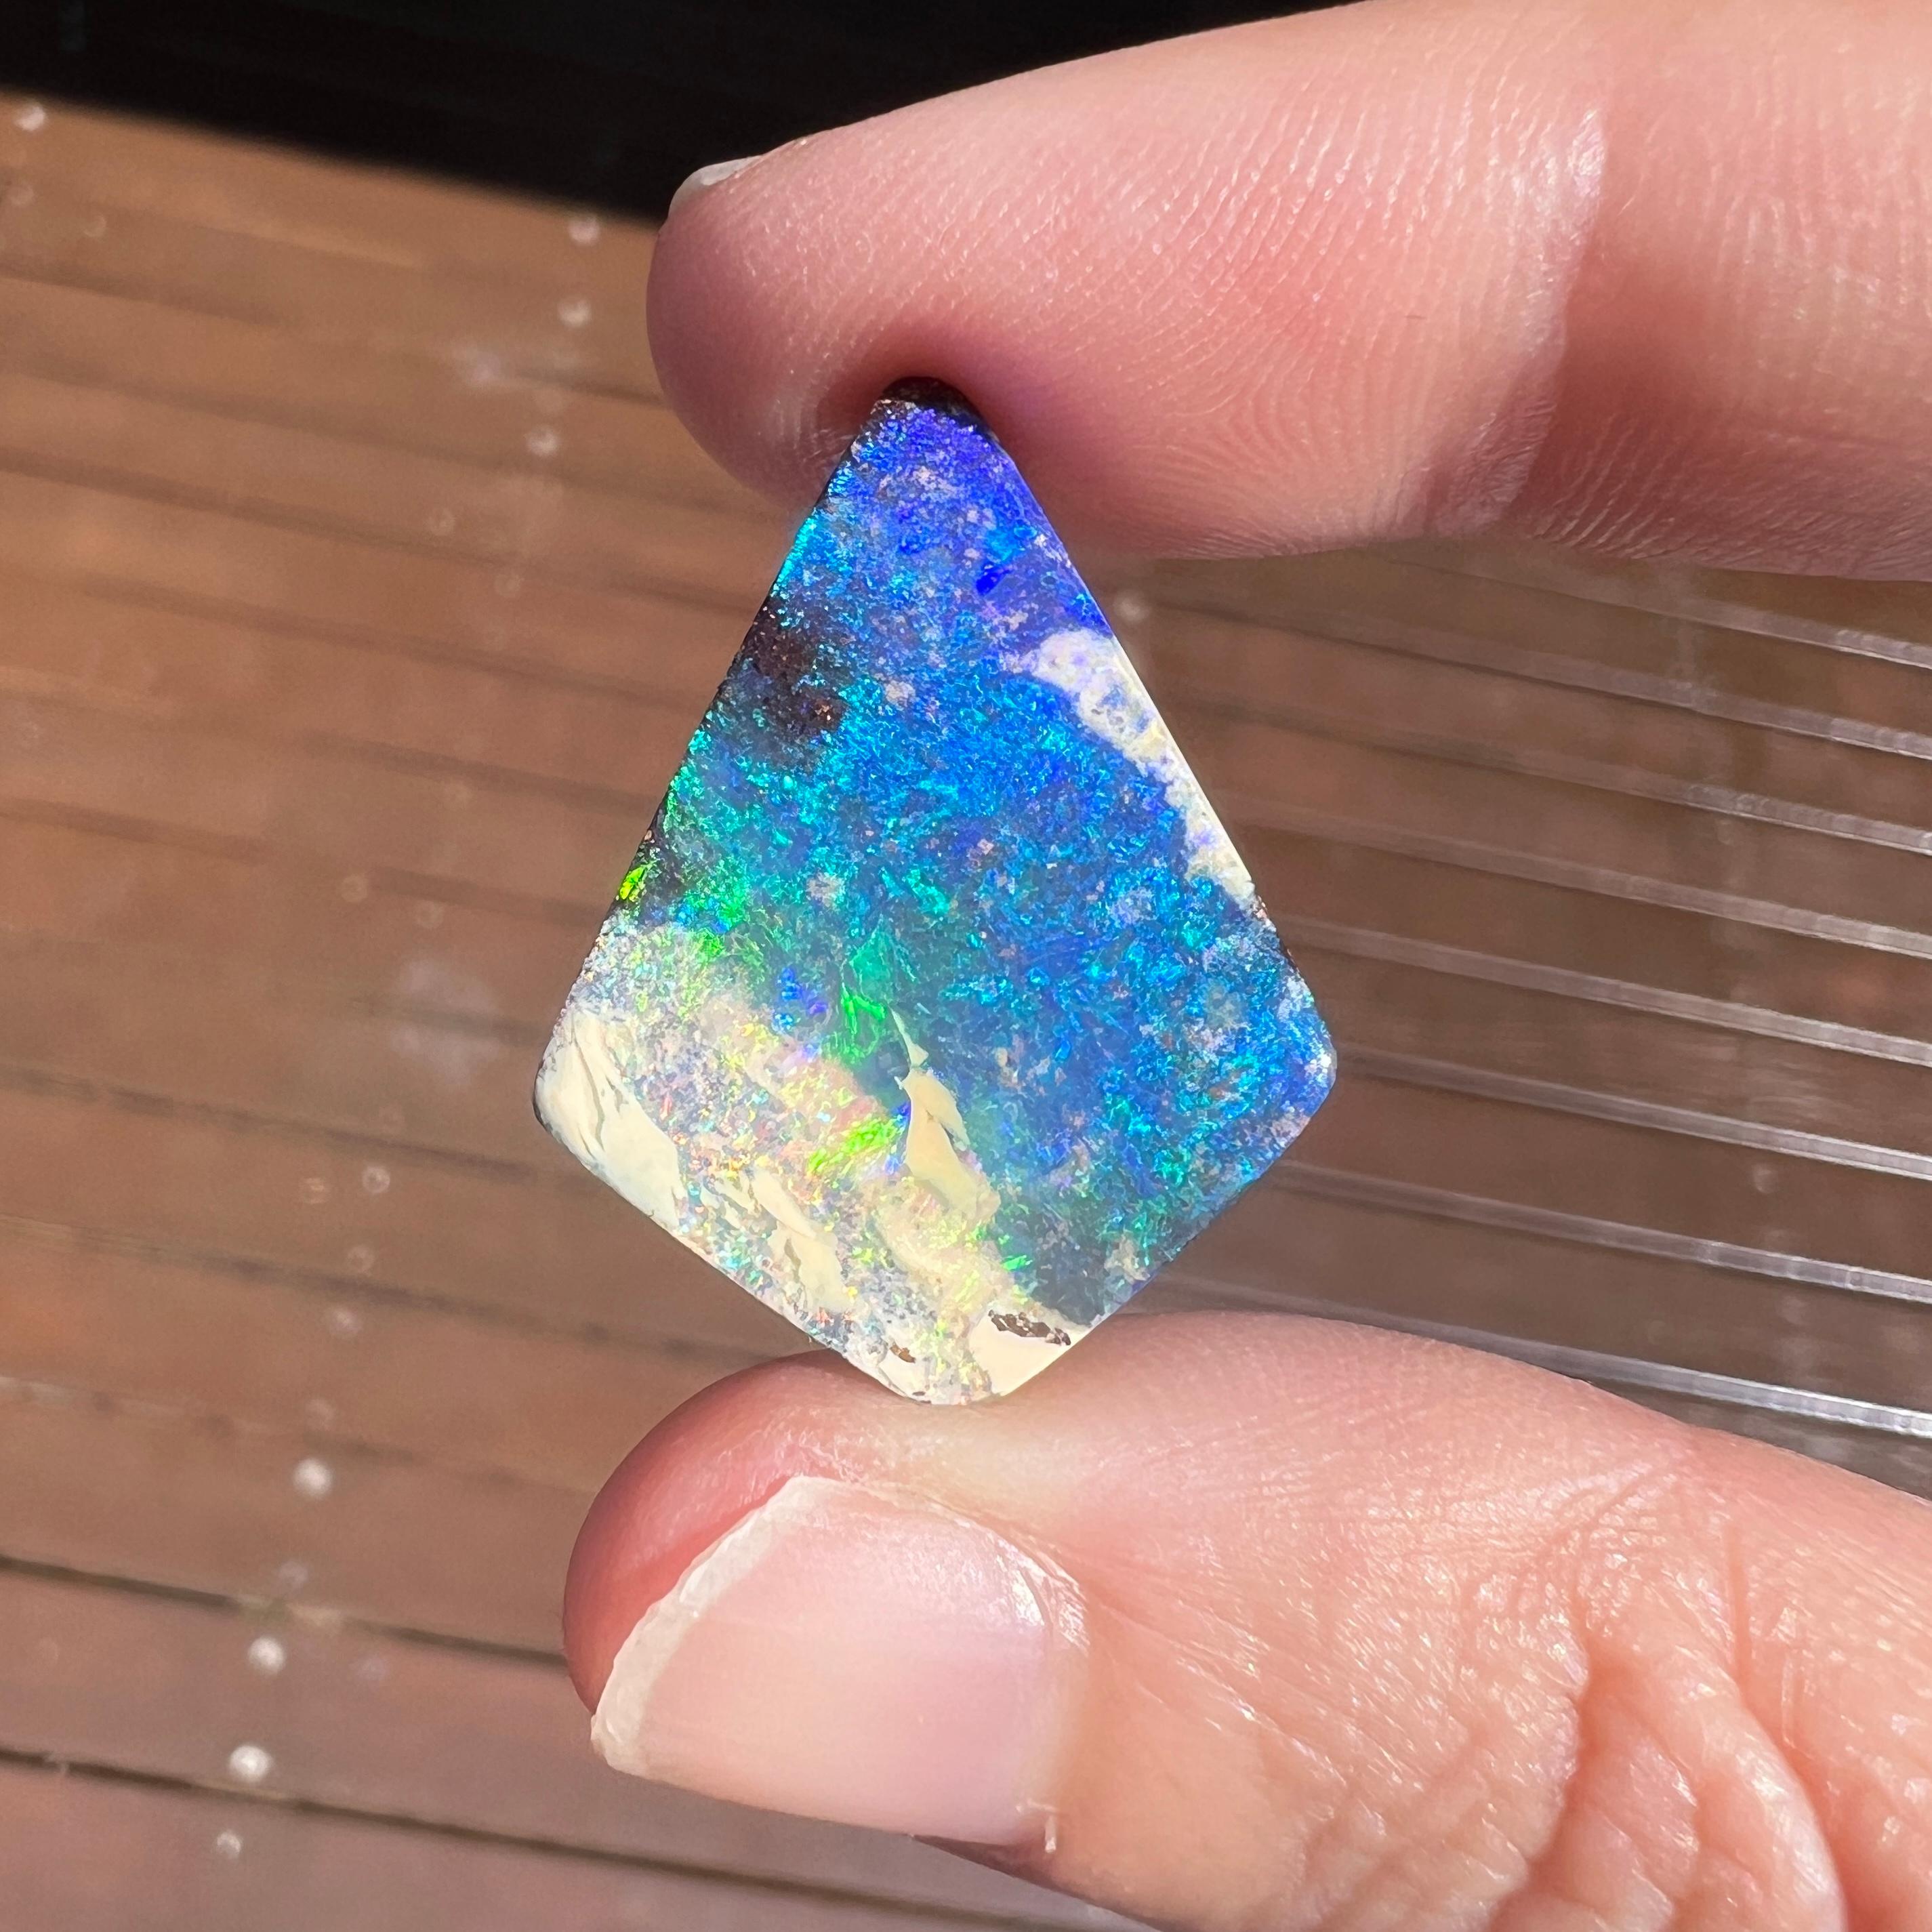 This unique 20.39 Ct Australian boulder opal was mined by Sue Cooper at her Yaraka opal mine in western Queensland, Australia in 2020. Sue processed the rough opal herself and cut into into a kite-shape. She selected to keep the natural light white